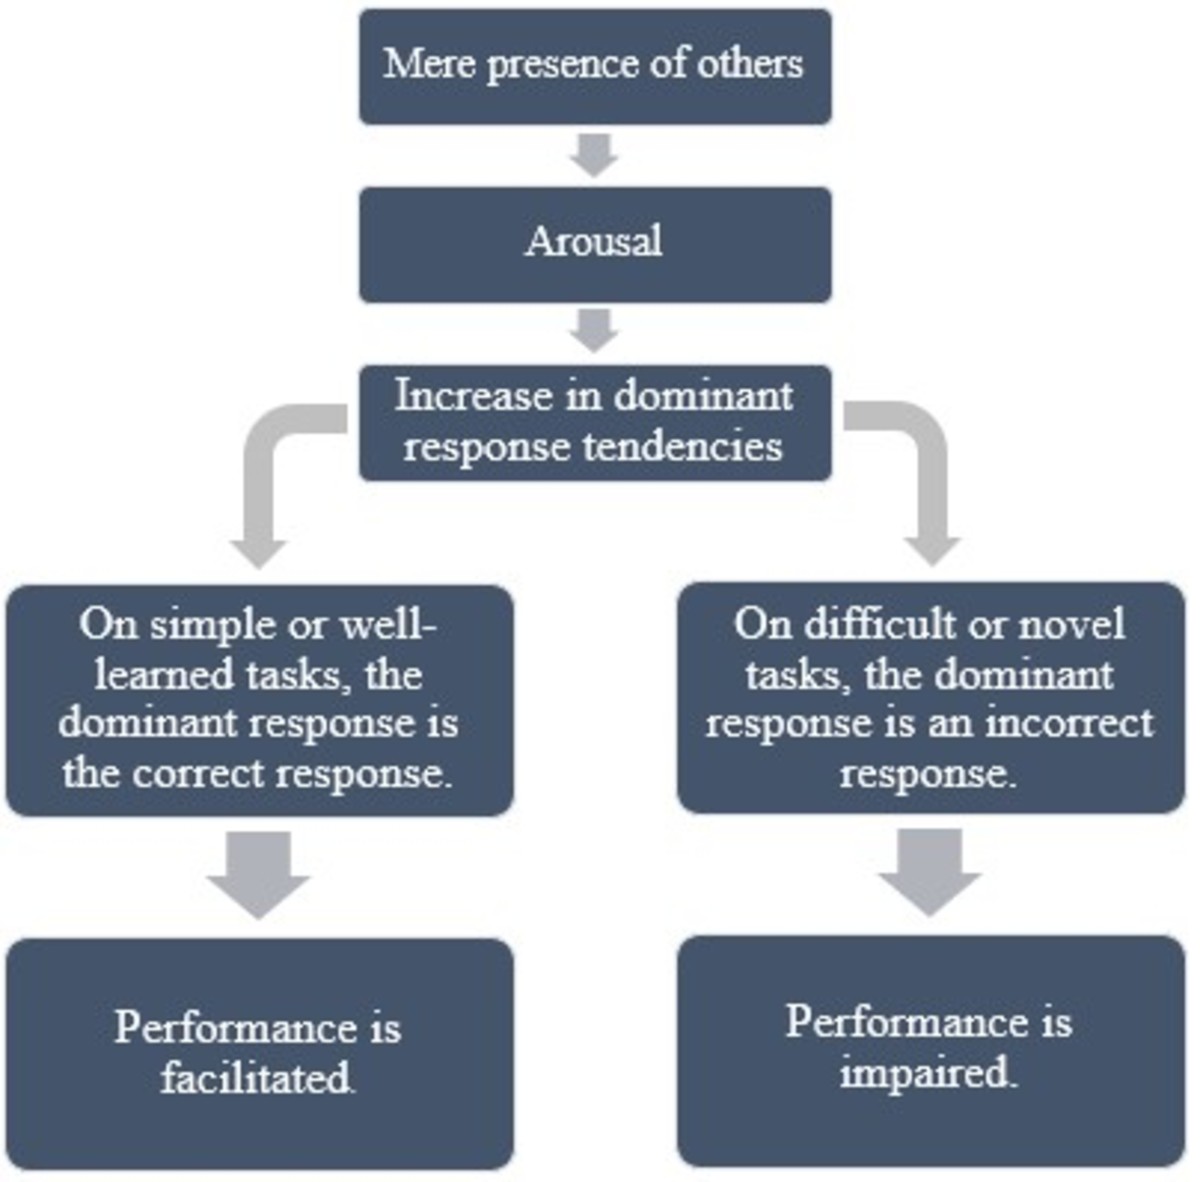 This figure demonstrates the effects that solely just being around others can have on one’s ability to choose their response and how well their behaviours will reflect on said response.